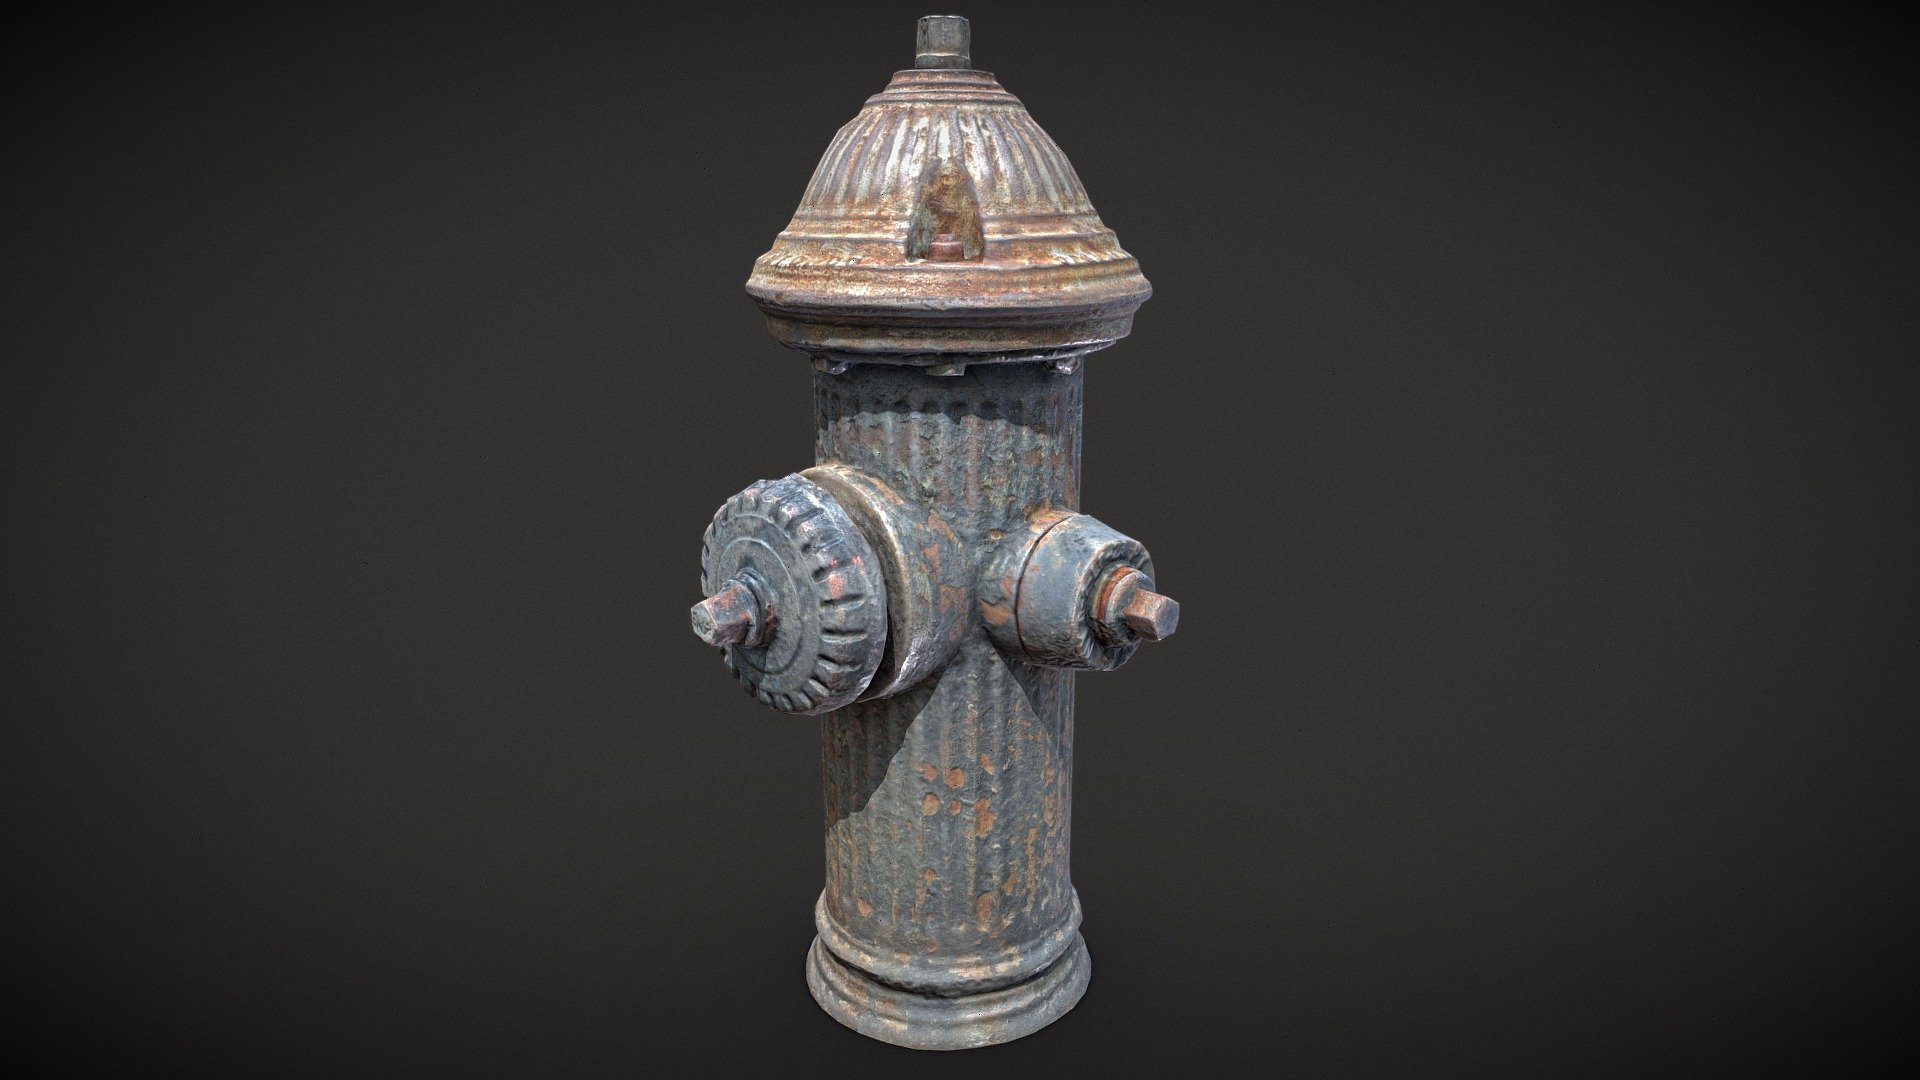 Fire Hydrant low poly 3D model.

Created based on scanned real world object. Original fire hydrant located on 38th Street Astoria, Queens

Lod0: 2801 polys, 5308 tris, 2708 verts
Lod1: 1436 polys, 2669 tris, 1381 verts
Lod2: 748 polys, 1305 tris, 705 verts
Lod3: 398 polys, 647 tris, 386 verts
Lod4: 224 polys, 339 tris, 210 verts
Lod5: 96 polys, 166 tris, 113 verts

Textures are 4096×4096 PNG and 2048×2048 JPG
diffuse
albedo
specular
roughness
ambient
cavity
normal
height - Fire Hydrant - Buy Royalty Free 3D model by Realtime (@gipapatank) 3d model